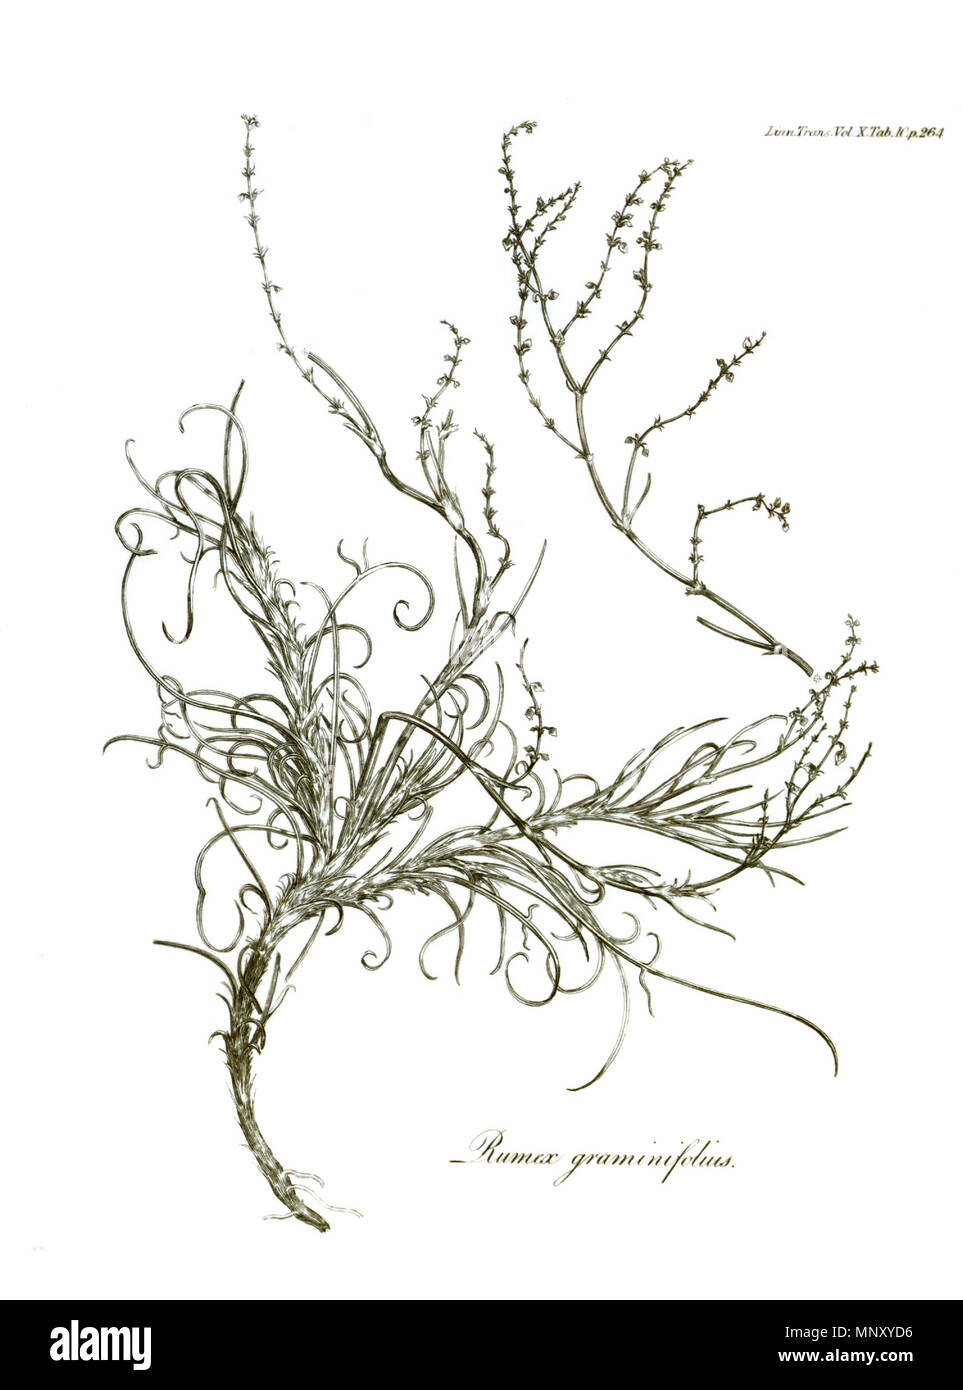 . Rumex graminifolius J.H. Rudolphi ex Lamb. on a page from Volume X of Transactions of the Linnean Society of London, published in 1811. 1811. Various 1203 Transactions of the Linnean Society of London, Volume 10 - tab. 10 Stock Photo